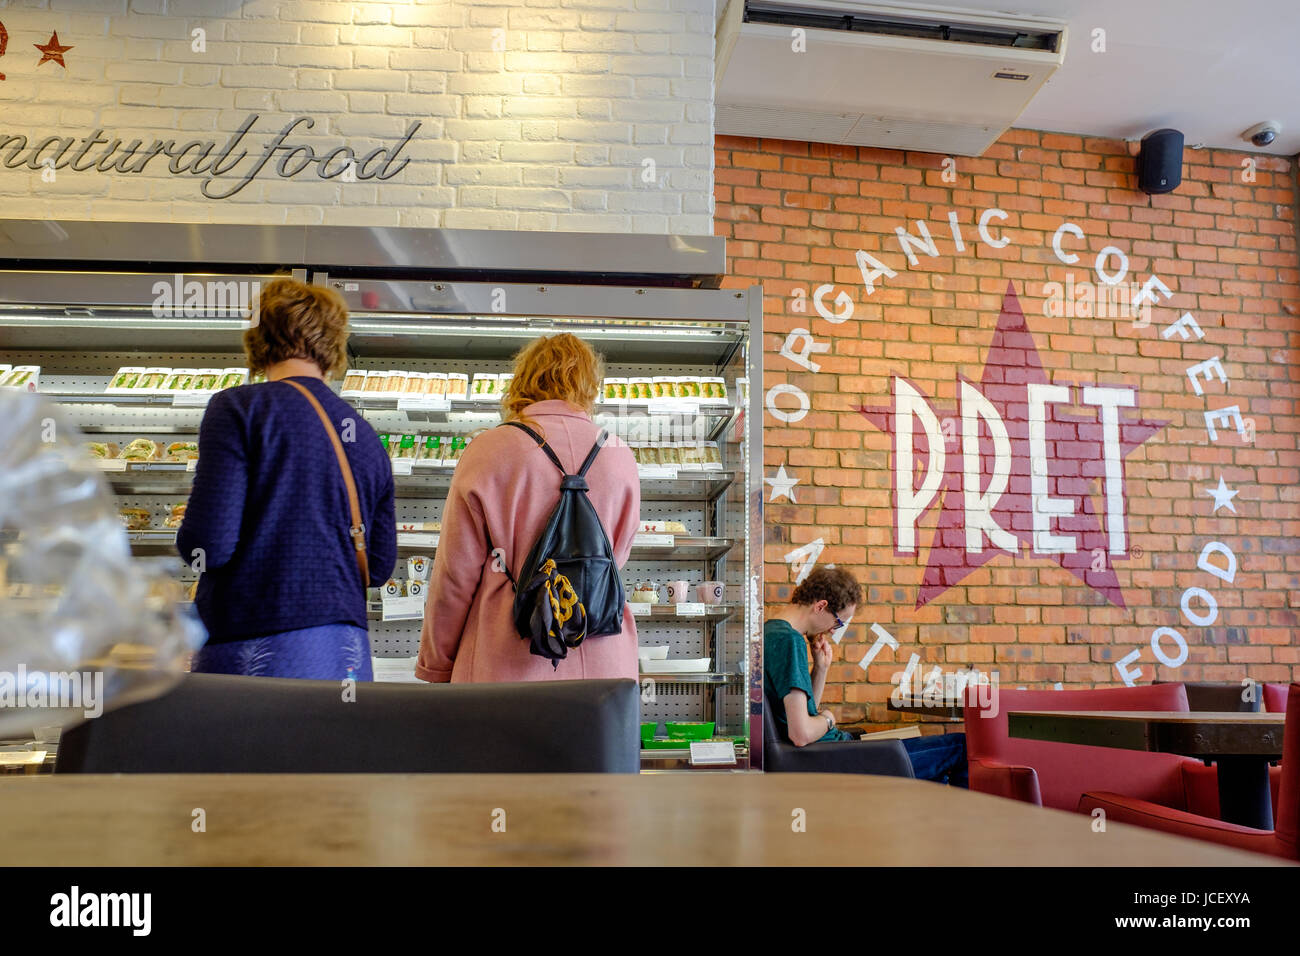 Inside the Pret a Manger cafe at Cambridge, England. Stock Photo